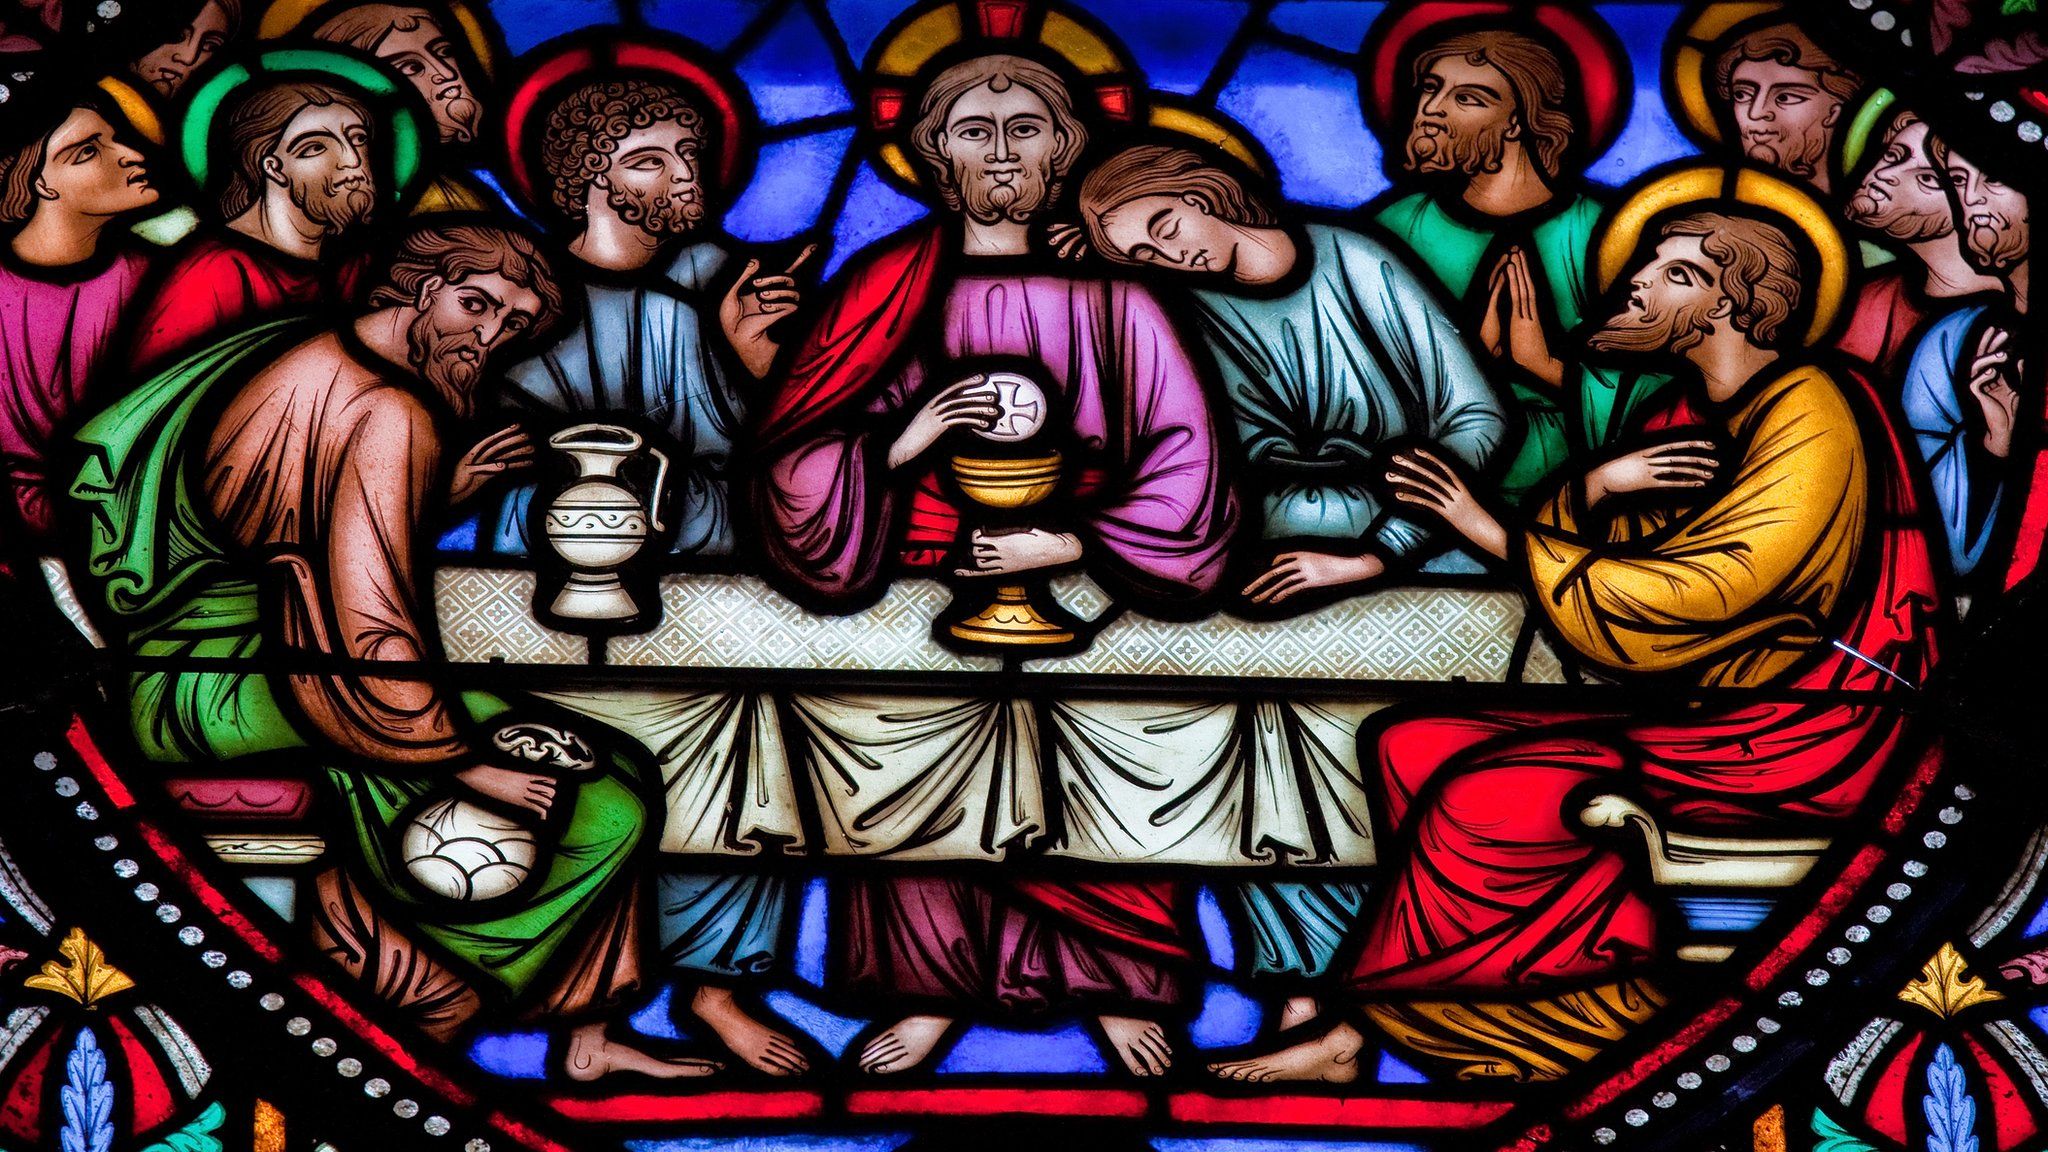 Last supper stained glass